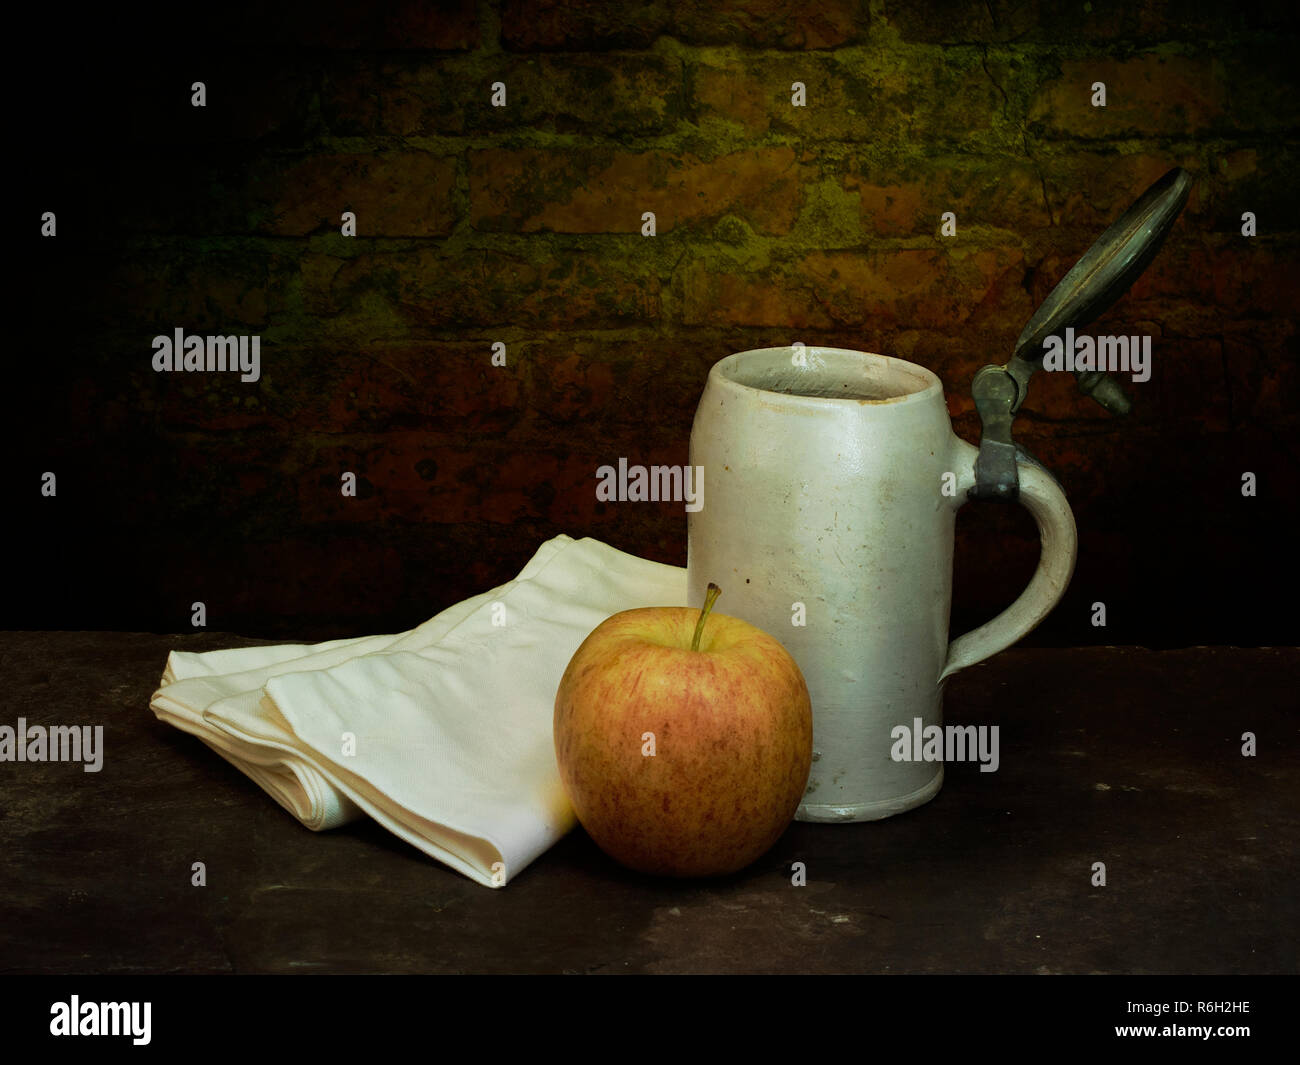 Old fashioned beer mug, tankard with apple and cloths, serviettes aka napkins. Lunch maybe. Still life. Stock Photo